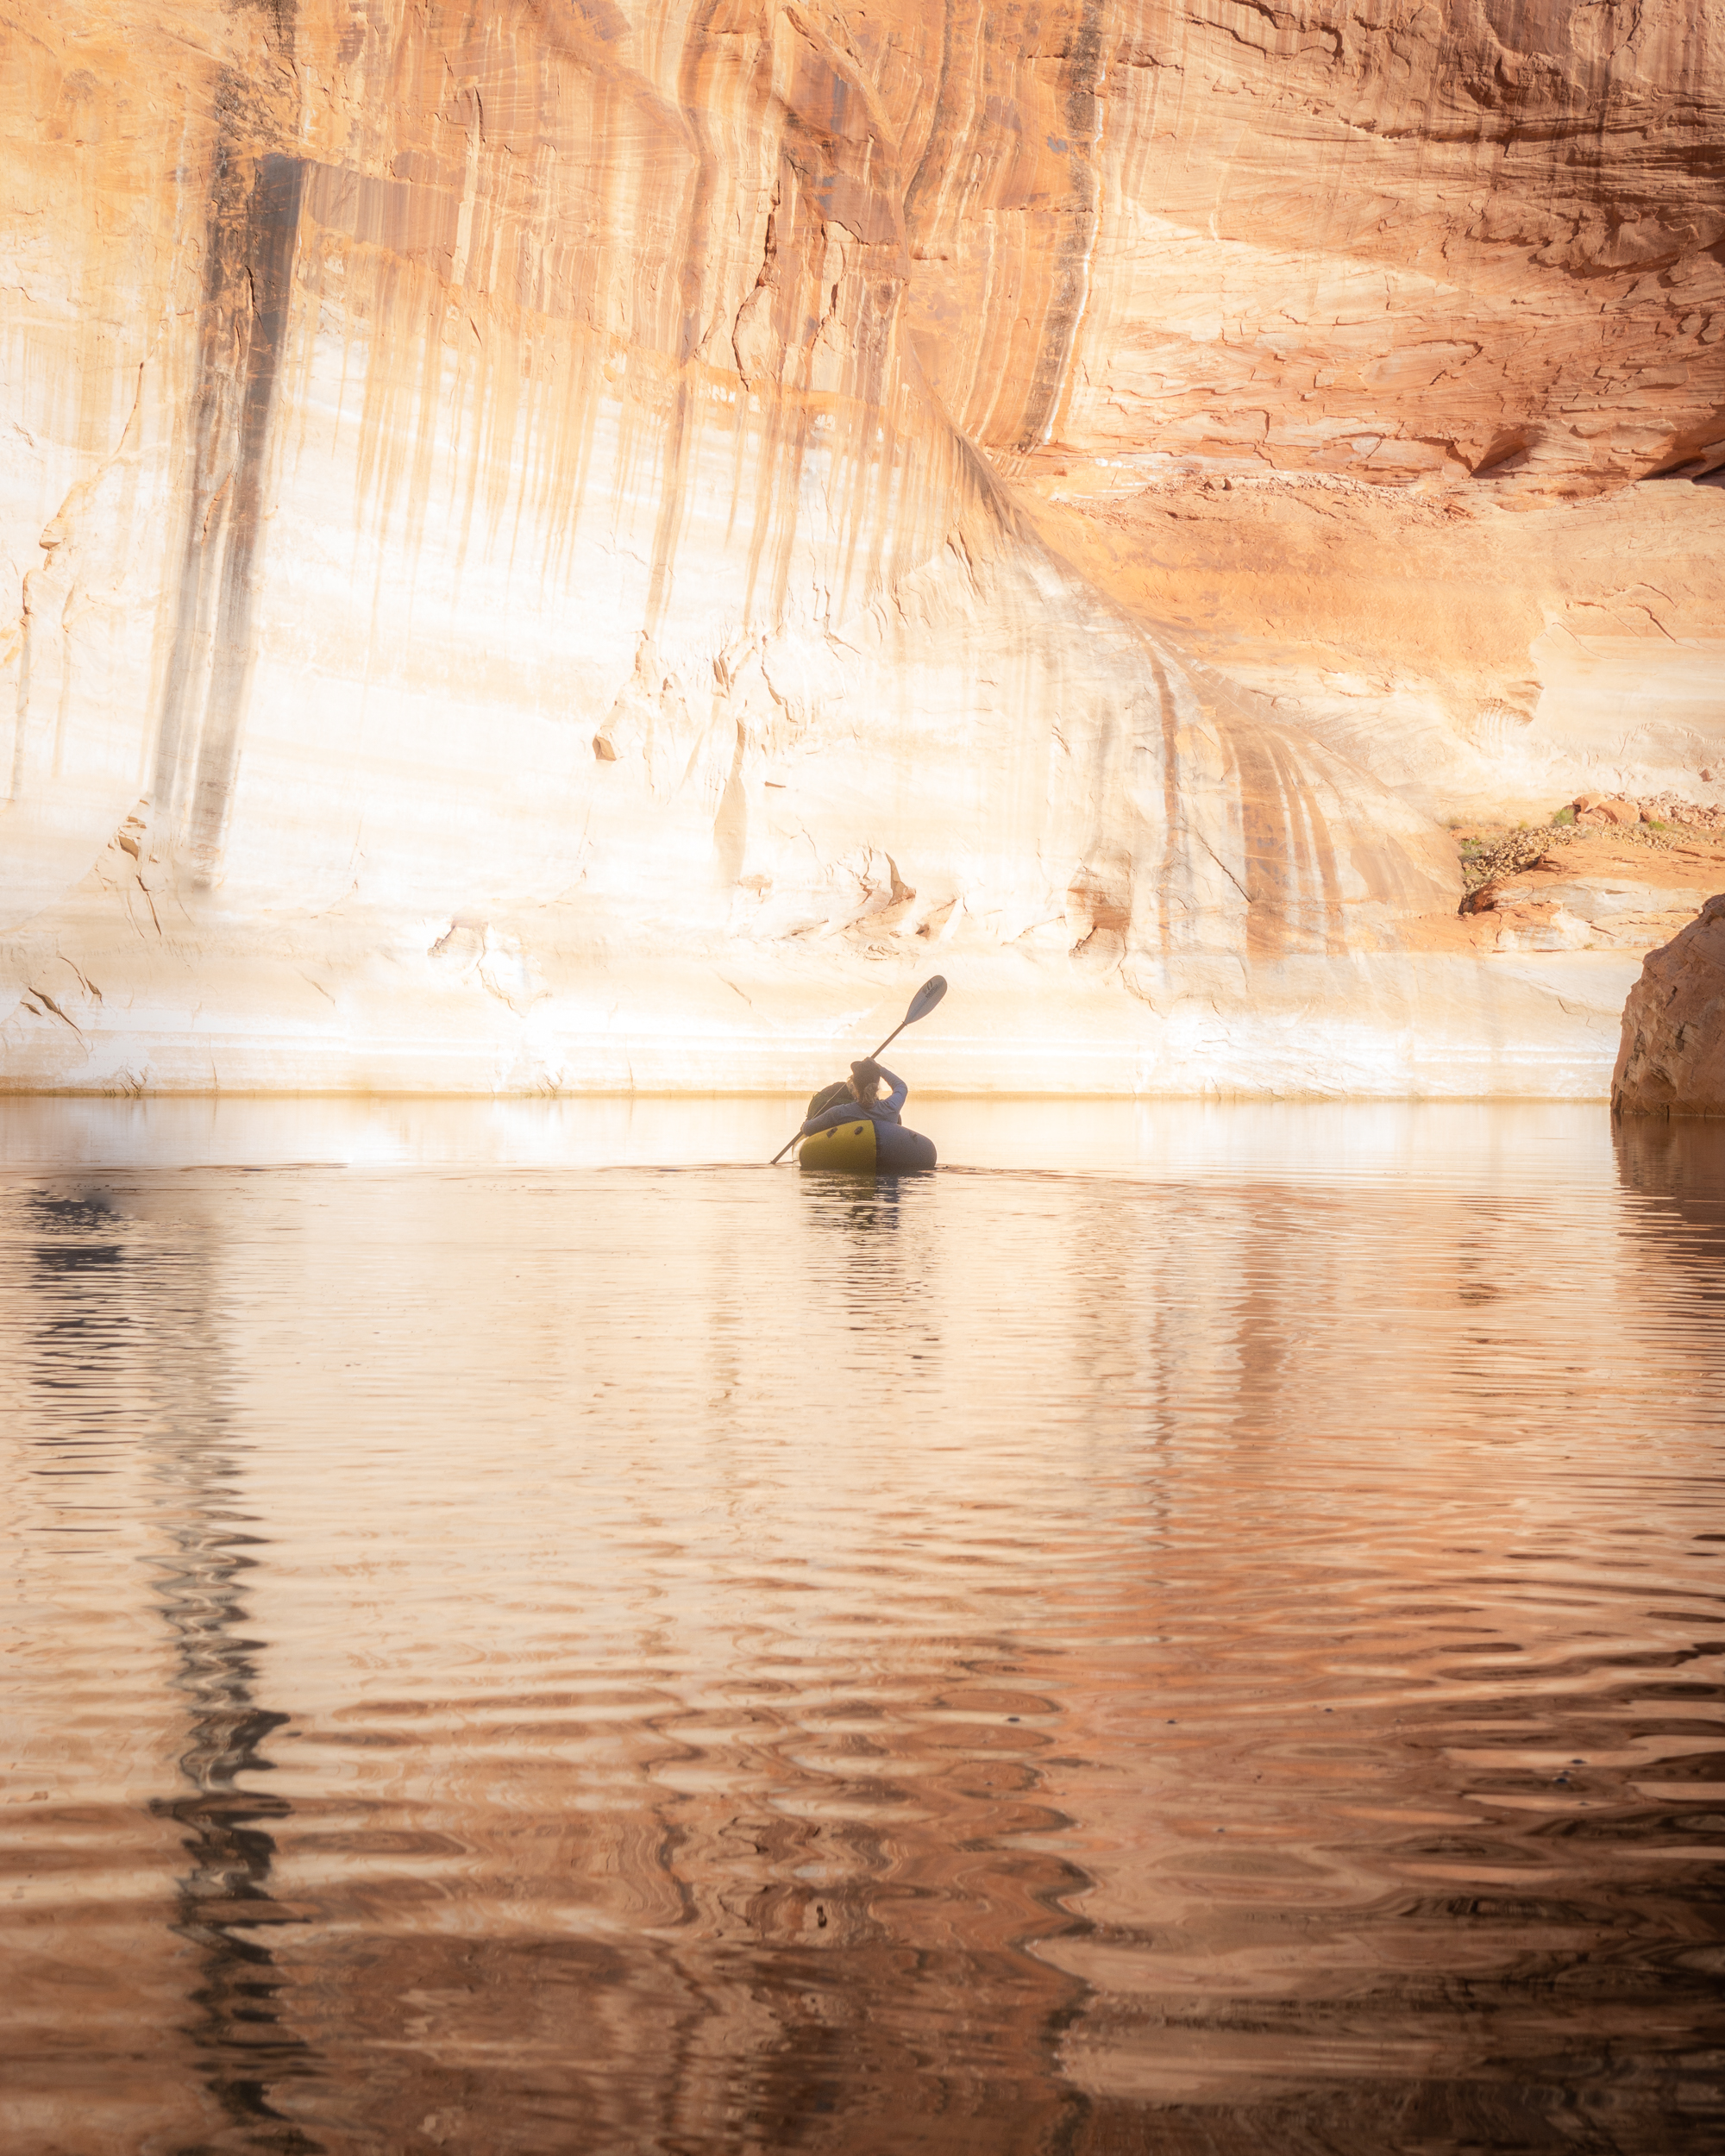 Photo taken on a  packrafting trip on Lake Powell  with the the  Sony Cyber-Shot .